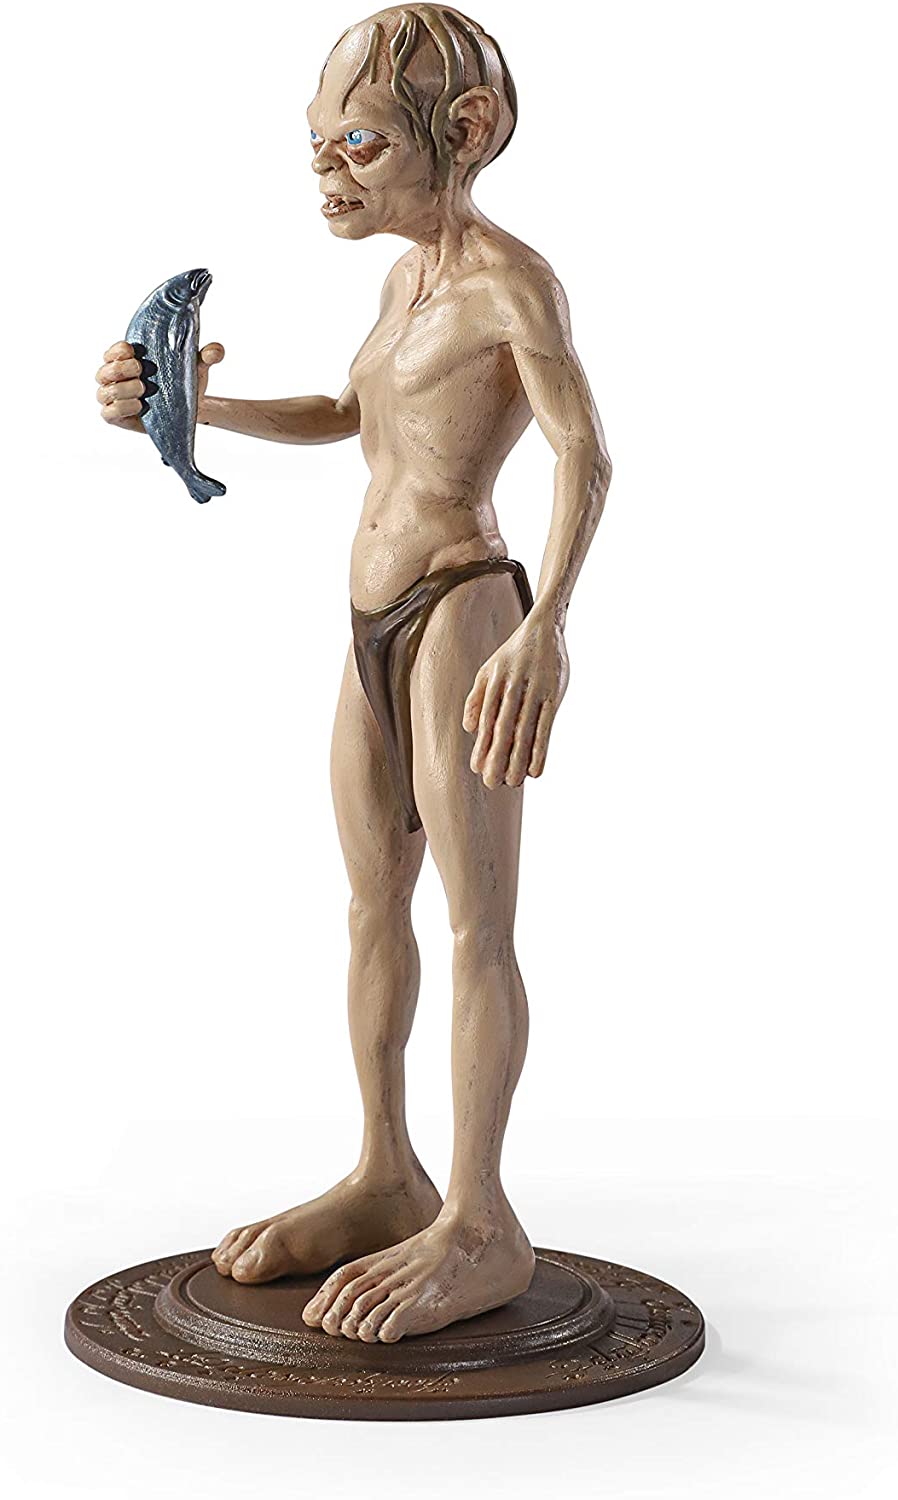 BendyFigs Lord of The Rings Gollum Oficial licenciado